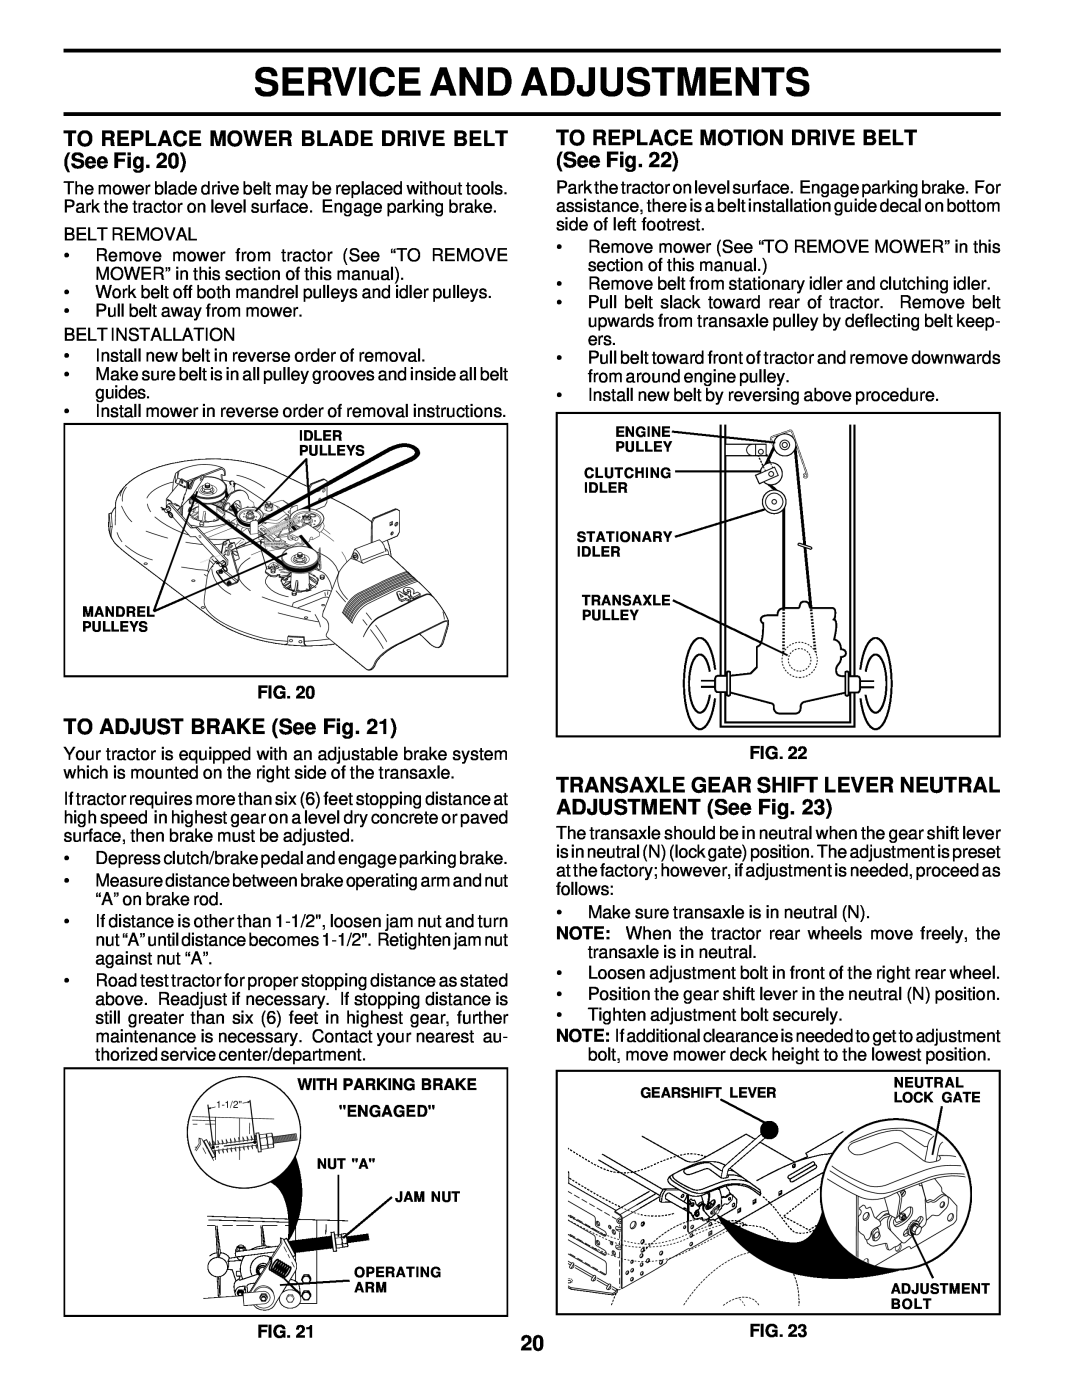 Poulan PR18542STC TO REPLACE MOWER BLADE DRIVE BELT See Fig, TO ADJUST BRAKE See Fig, TO REPLACE MOTION DRIVE BELT See Fig 